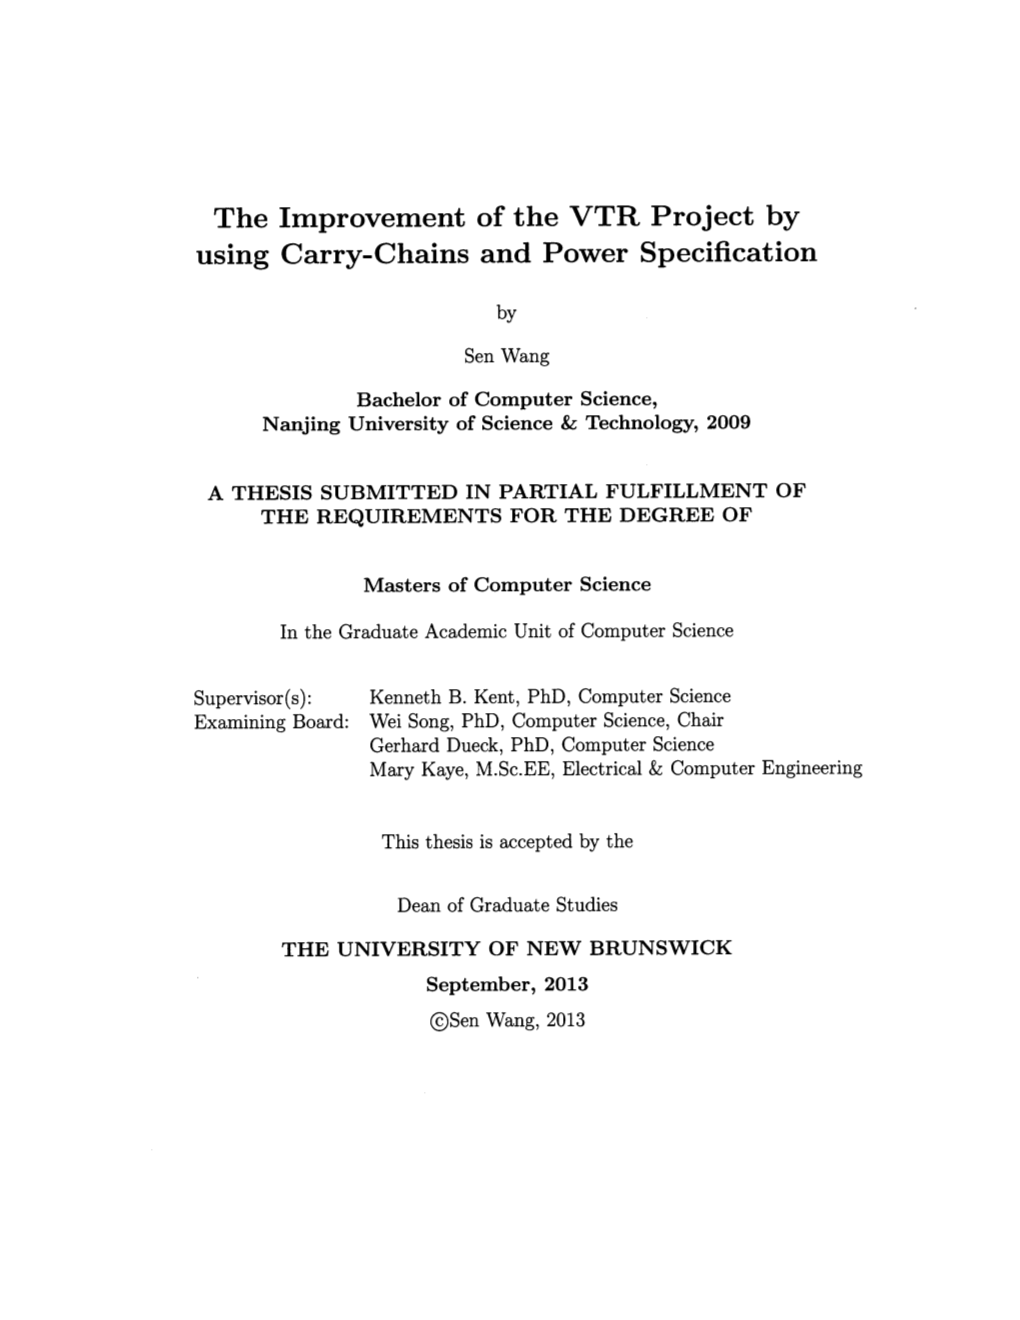 The Improvement of the VTR Project by Using Carry-Chains and Power Specification